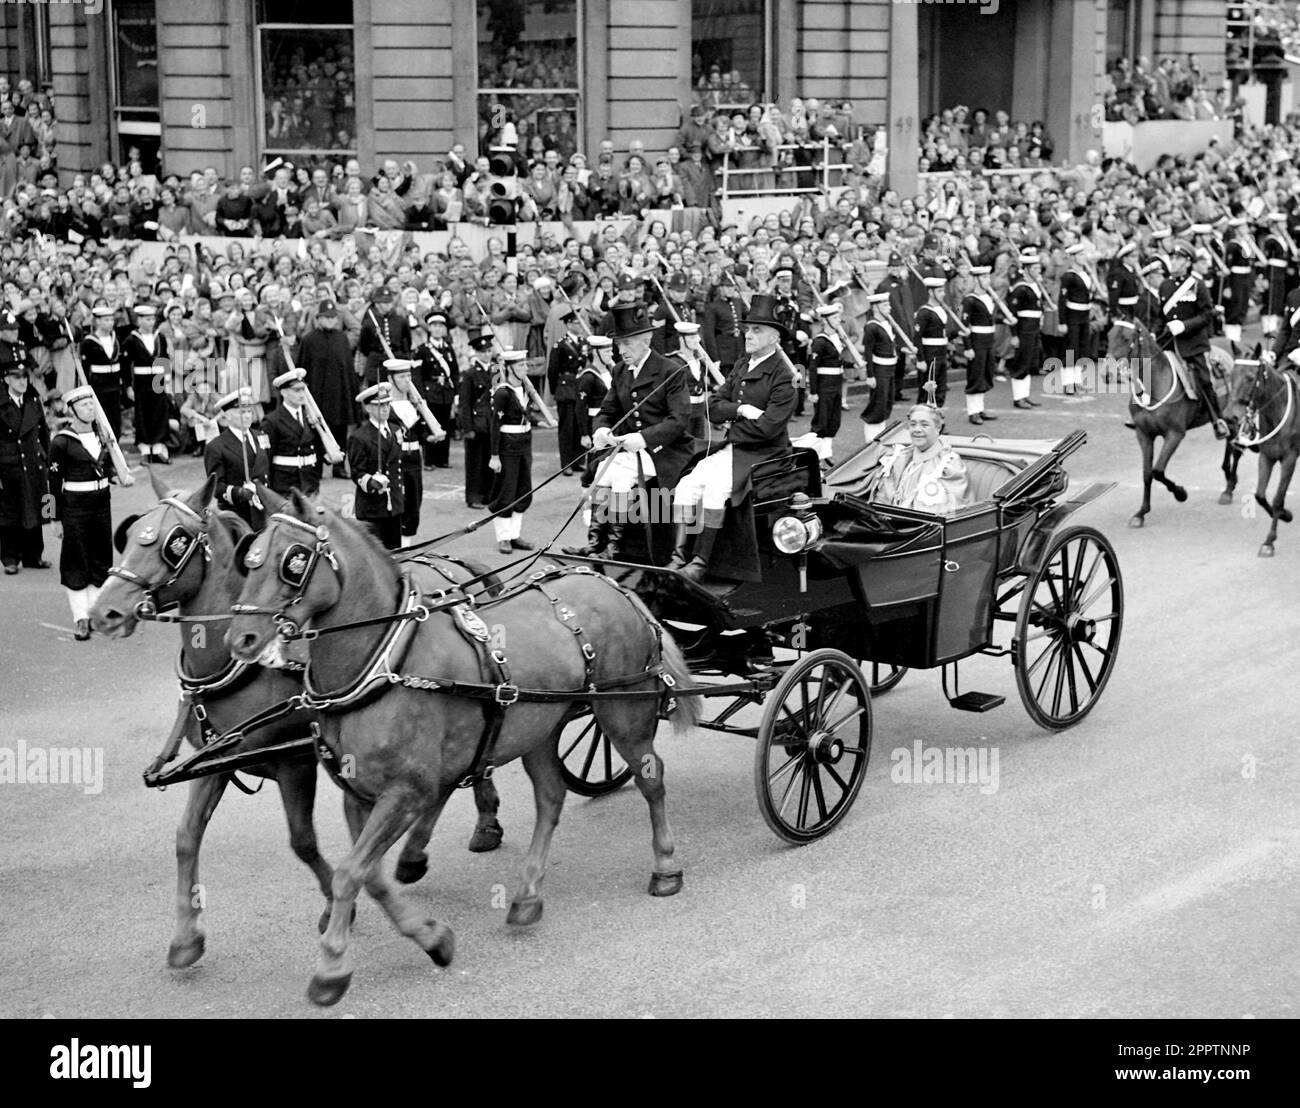 File photo dated 02/06/53 of Queen Salote of Tonga in an open carriage escorted by mounted military police after passing through Admiralty Arch on the way from Buckingham Palace to Westminster Abbey for the Coronation. The 1953 coronation was a morale boost in the tough post-war years as millions celebrated the historic day. Elizabeth II was crowned in a deeply religious ceremony in Westminster Abbey on June 2 1953. Issue date: Tuesday April 25, 2023. Stock Photo